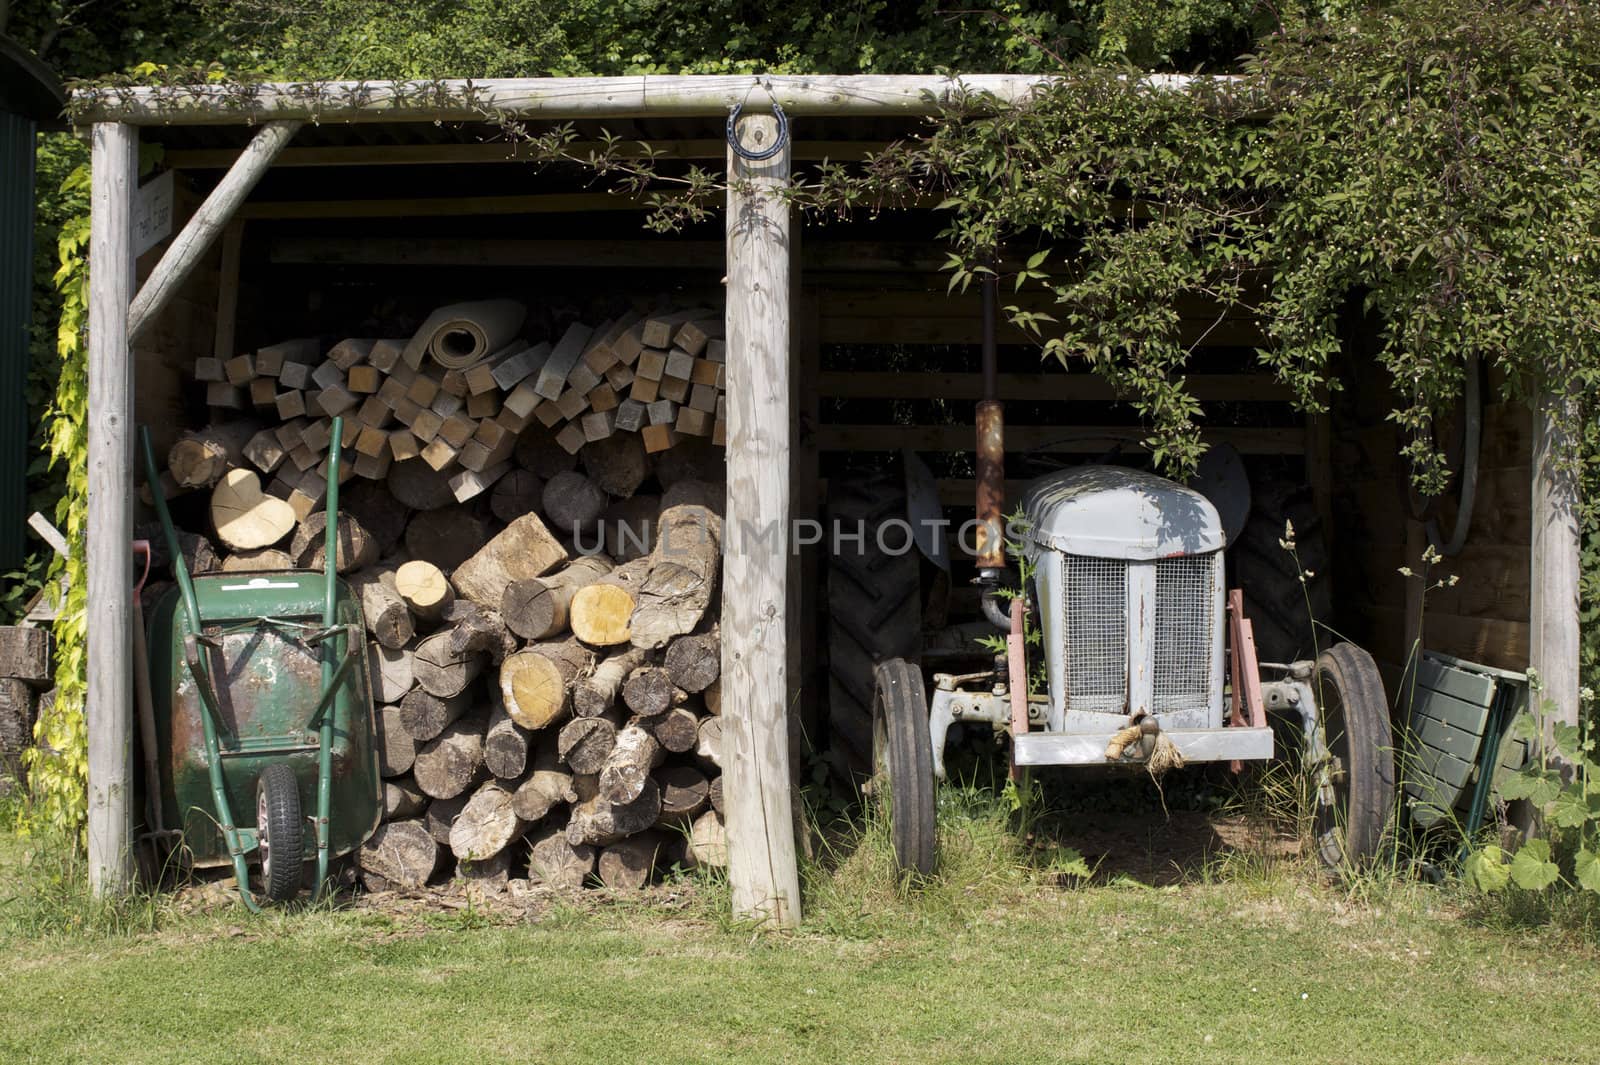 A rural farmyard wooden shed with stored cut logs to one side, with a vintage grey tractor to the other. A green wheelbarrow leant against the pile of logs.